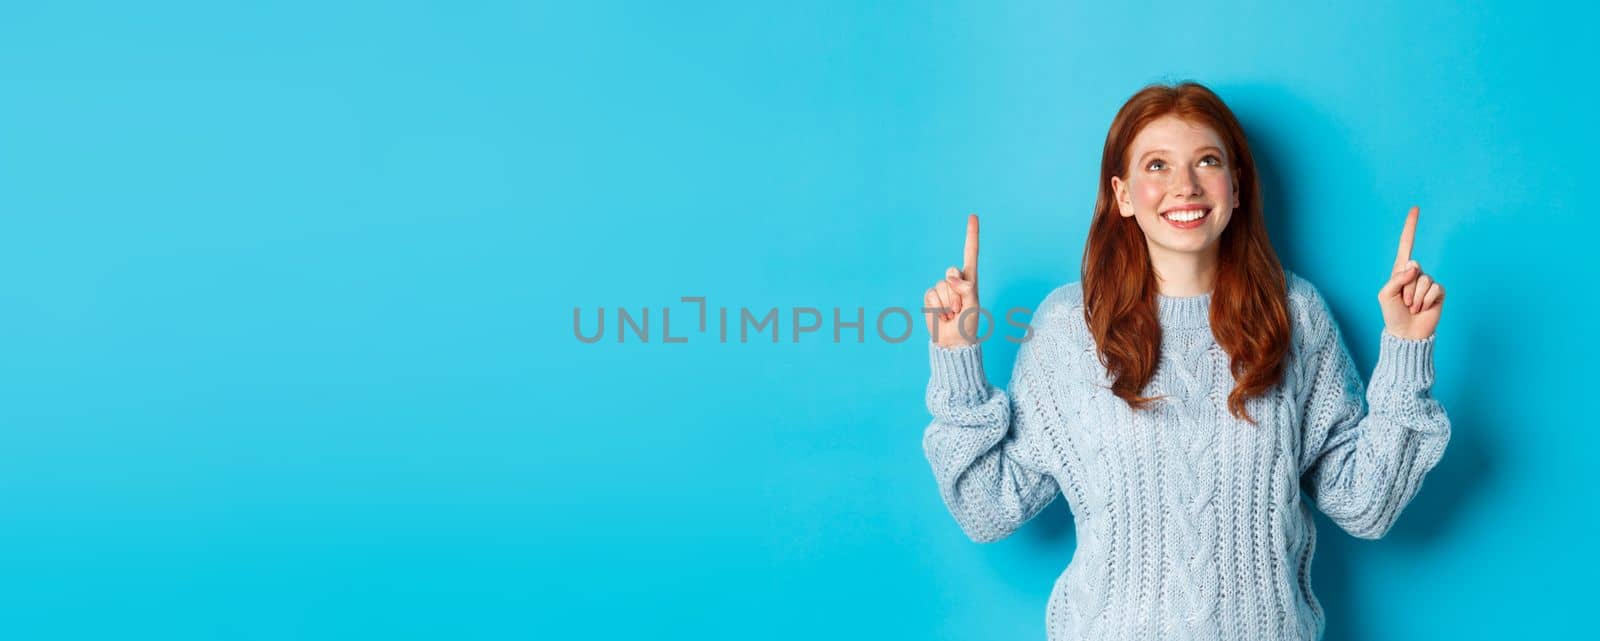 Winter holidays and people concept. Cute teenage redhead girl pointing fingers up, looking at top promo and smiling amused, standing over blue background.